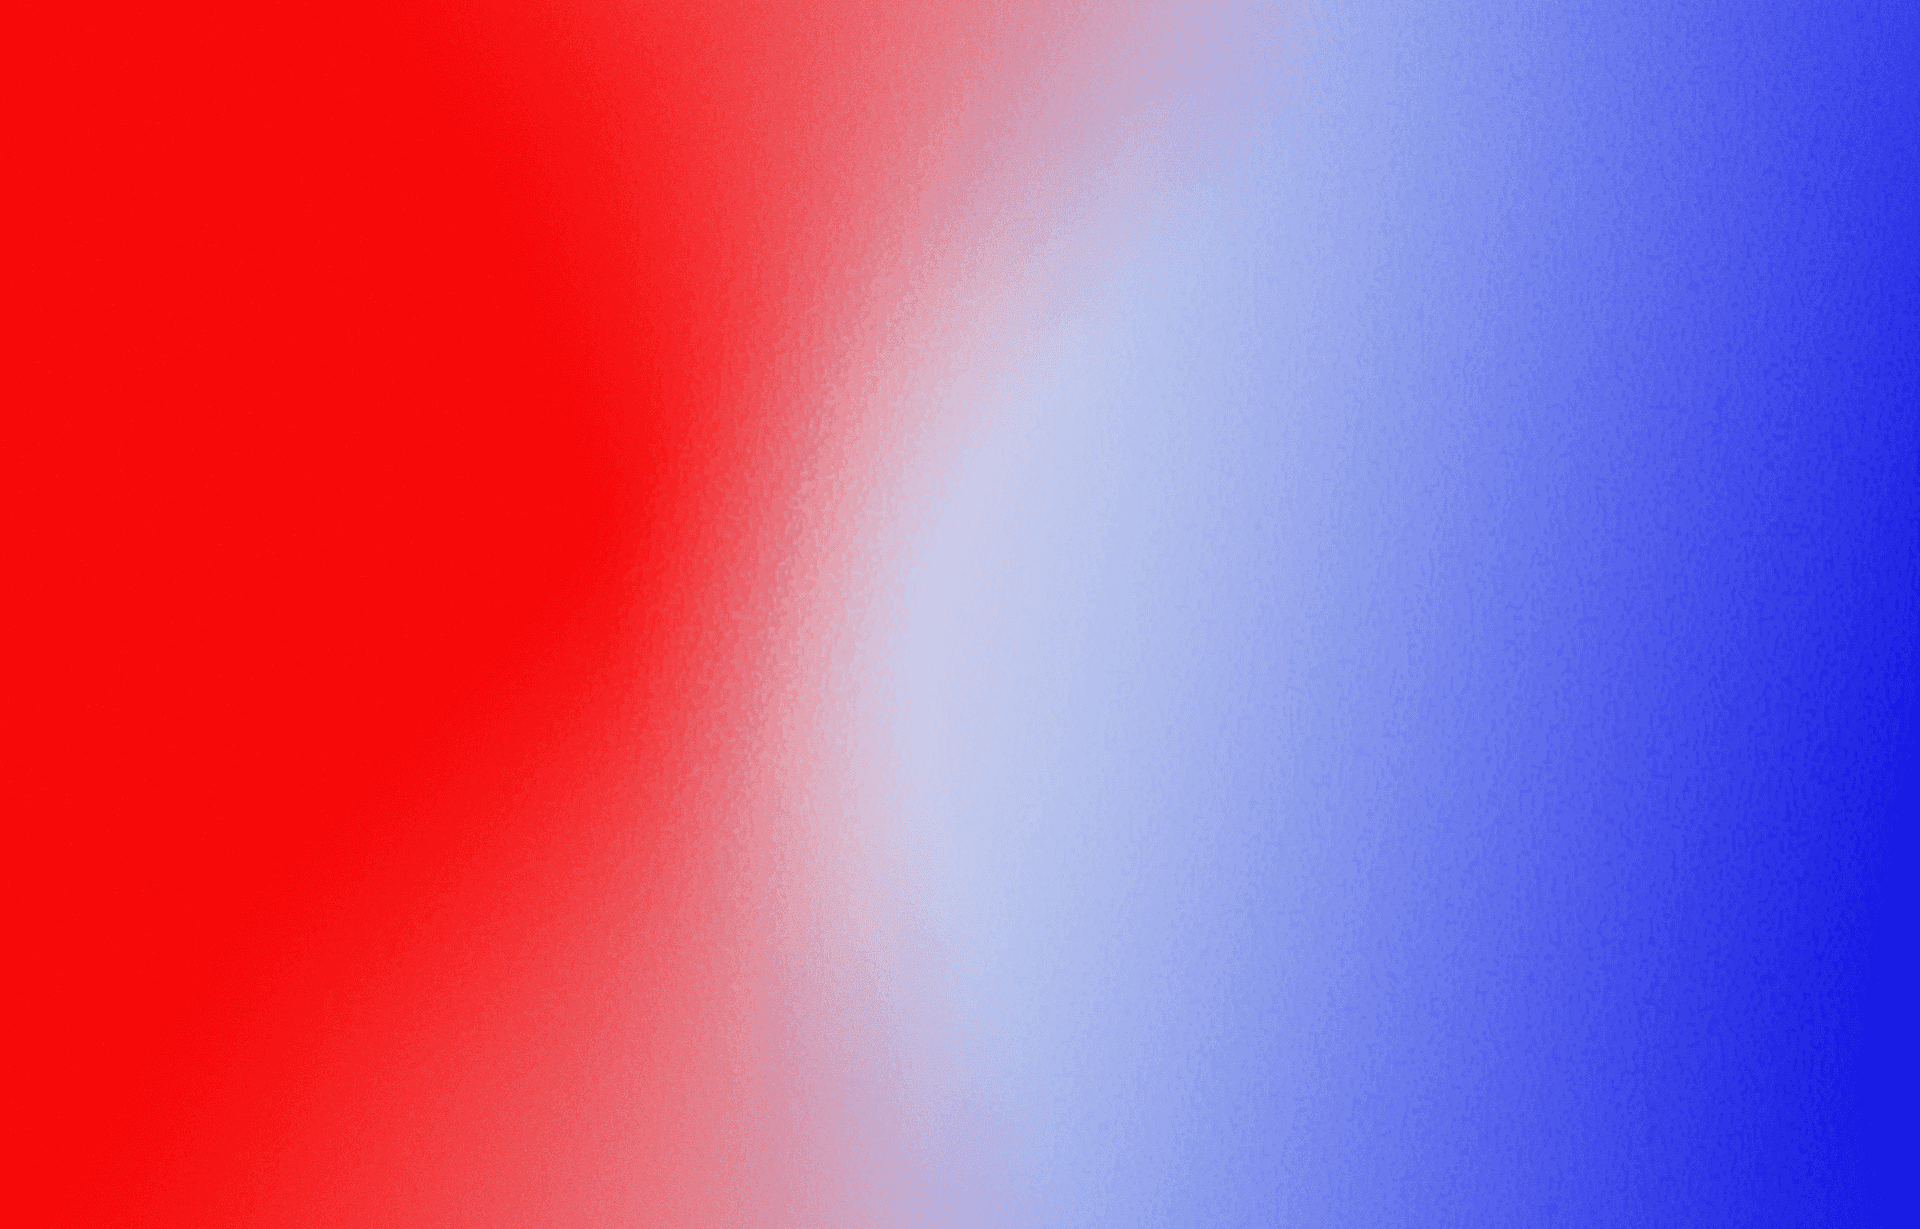 A bold two-tone background of red and blue